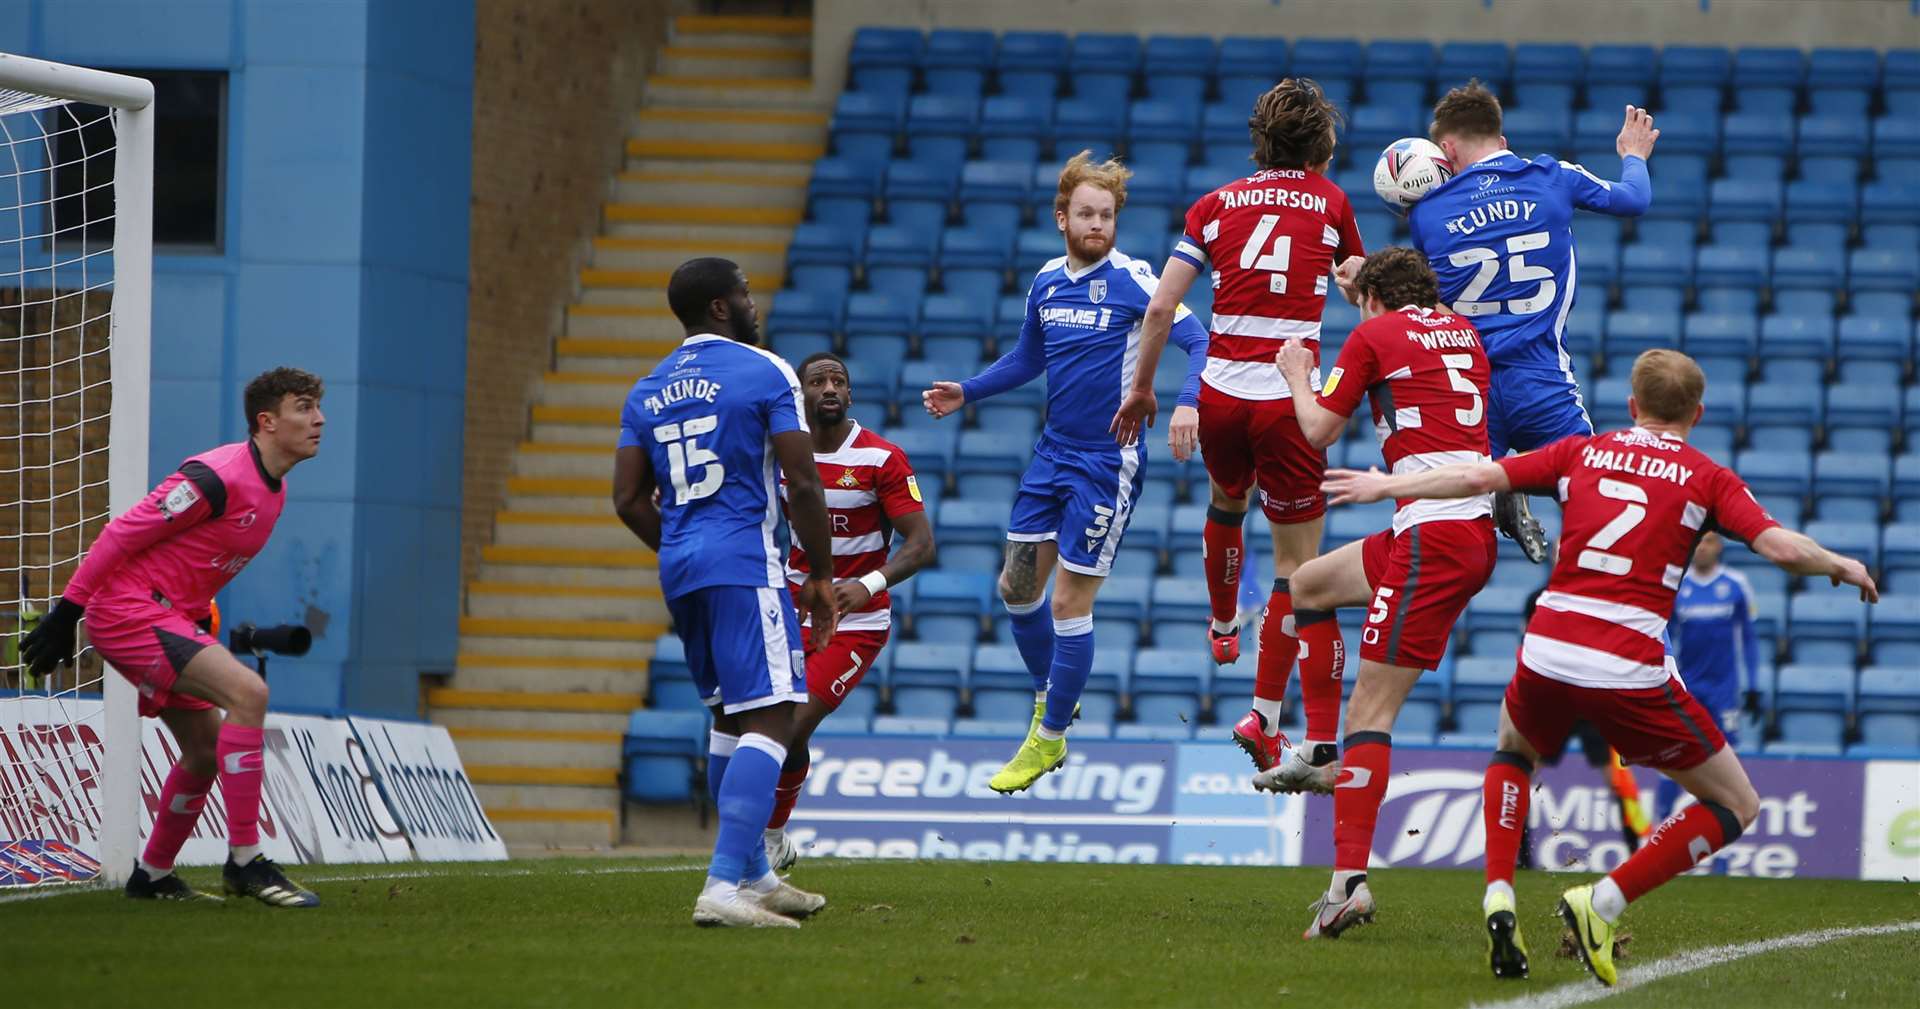 Gillingham defender Robbie Cundy looks to head towards goal against Doncaster. Picture: Andy Jones (45336071)